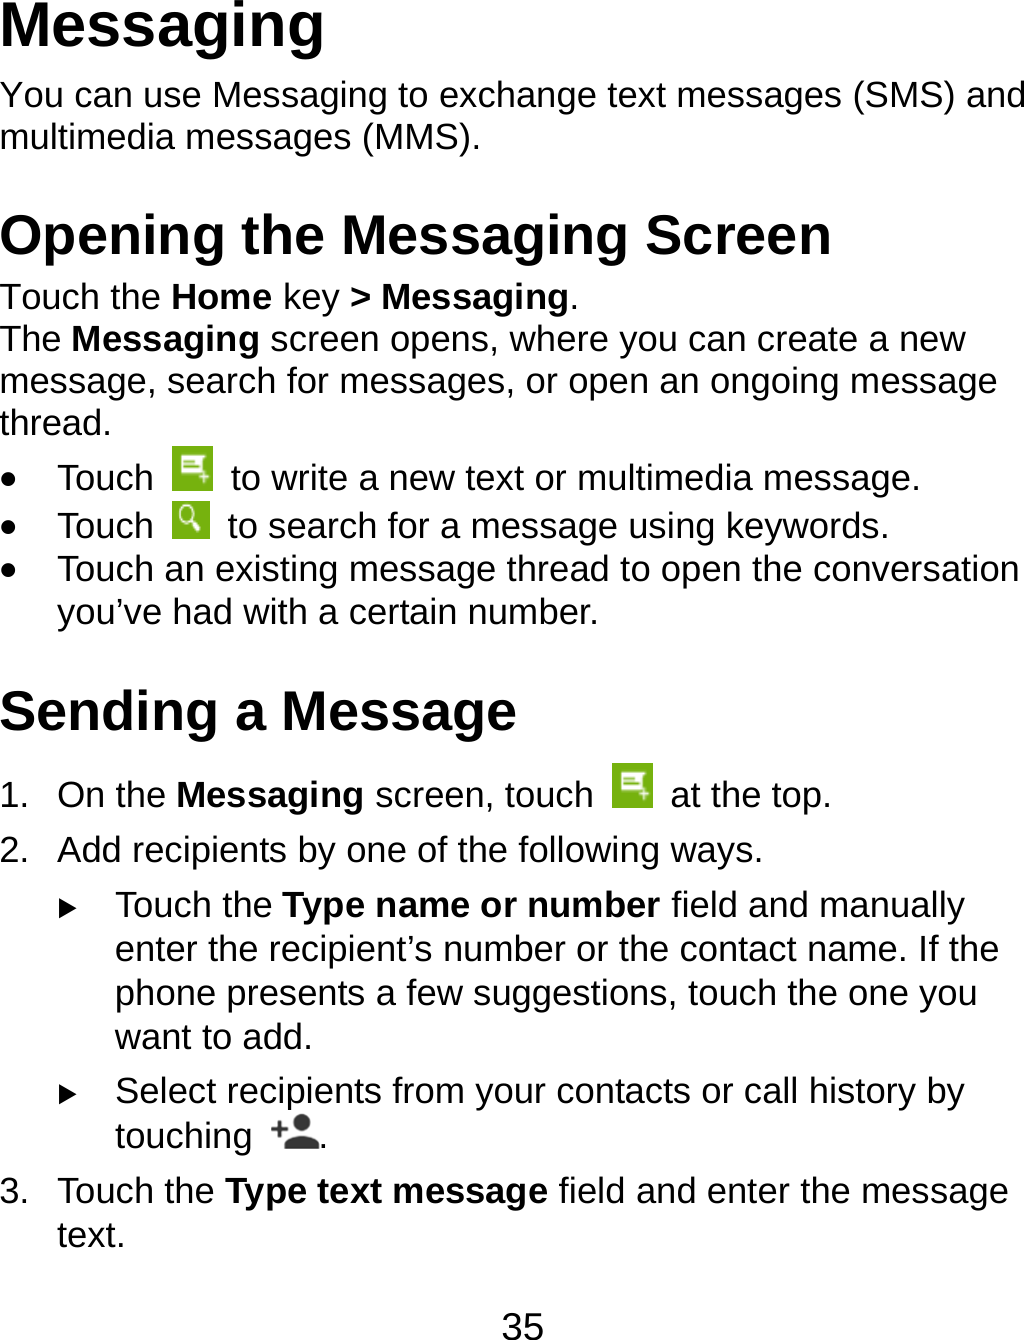 35 Messaging You can use Messaging to exchange text messages (SMS) and multimedia messages (MMS). Opening the Messaging Screen Touch the Home key &gt; Messaging. The Messaging screen opens, where you can create a new message, search for messages, or open an ongoing message thread.  Touch    to write a new text or multimedia message.  Touch    to search for a message using keywords.  Touch an existing message thread to open the conversation you’ve had with a certain number.   Sending a Message 1. On the Messaging screen, touch   at the top. 2.  Add recipients by one of the following ways.  Touch the Type name or number field and manually enter the recipient’s number or the contact name. If the phone presents a few suggestions, touch the one you want to add.  Select recipients from your contacts or call history by touching  . 3. Touch the Type text message field and enter the message text. 